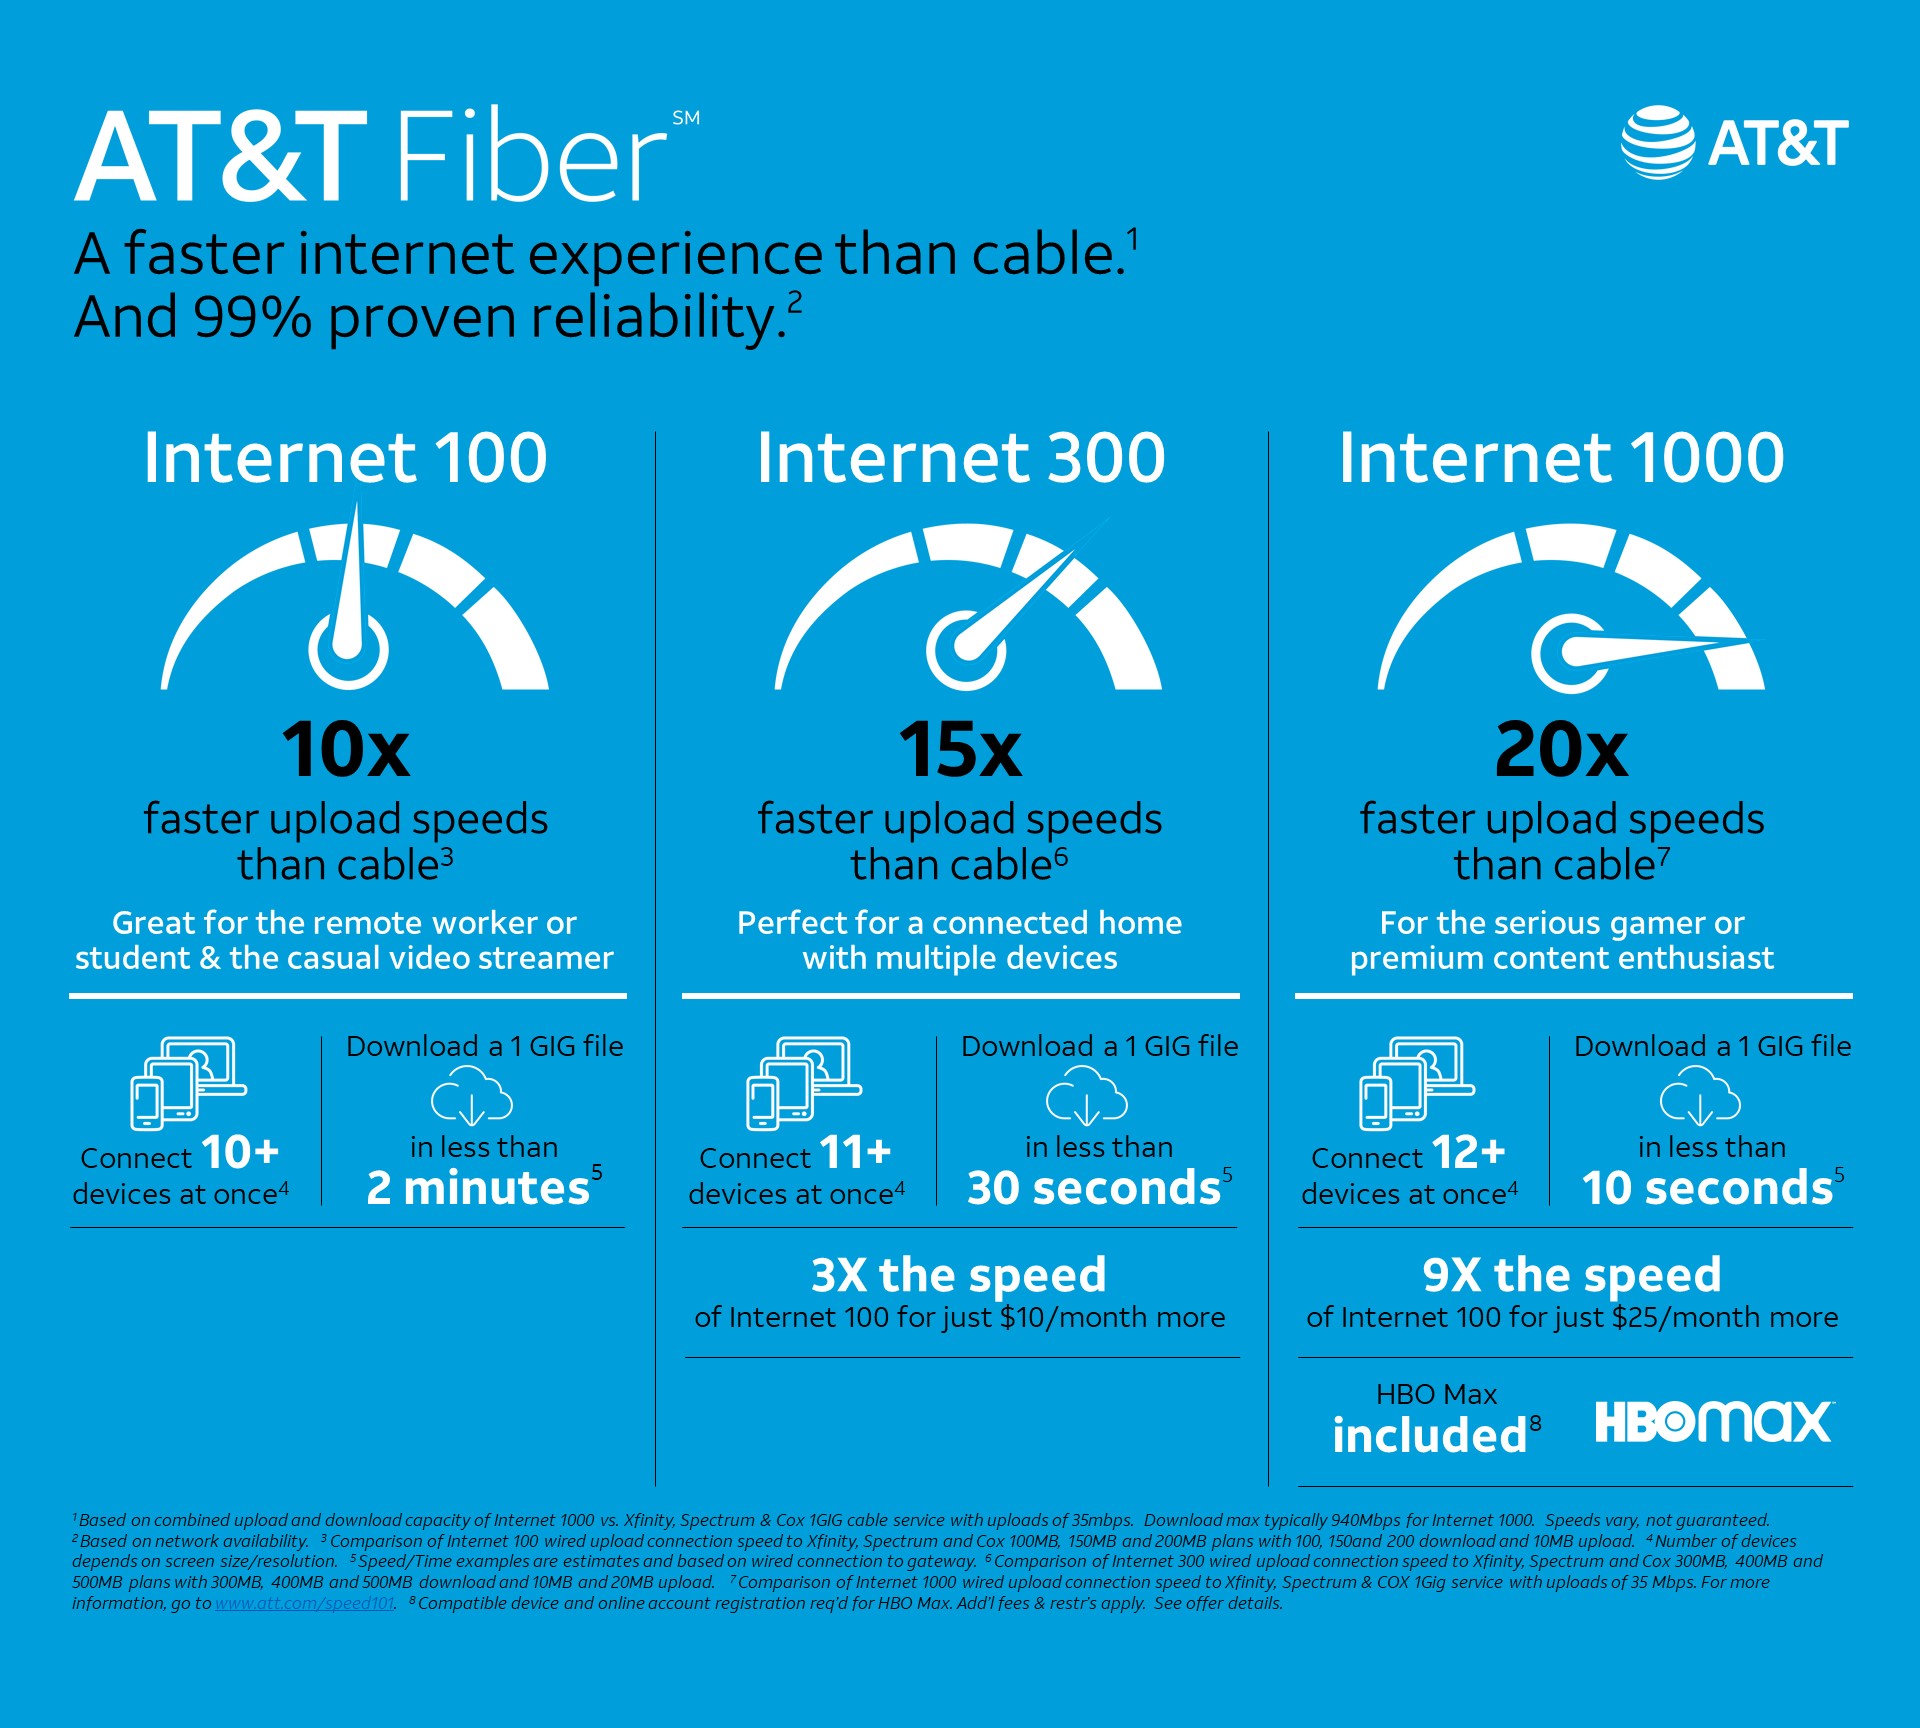 AT&T Fiber Introduces New Pricing Options, Unlimited Data for Customers